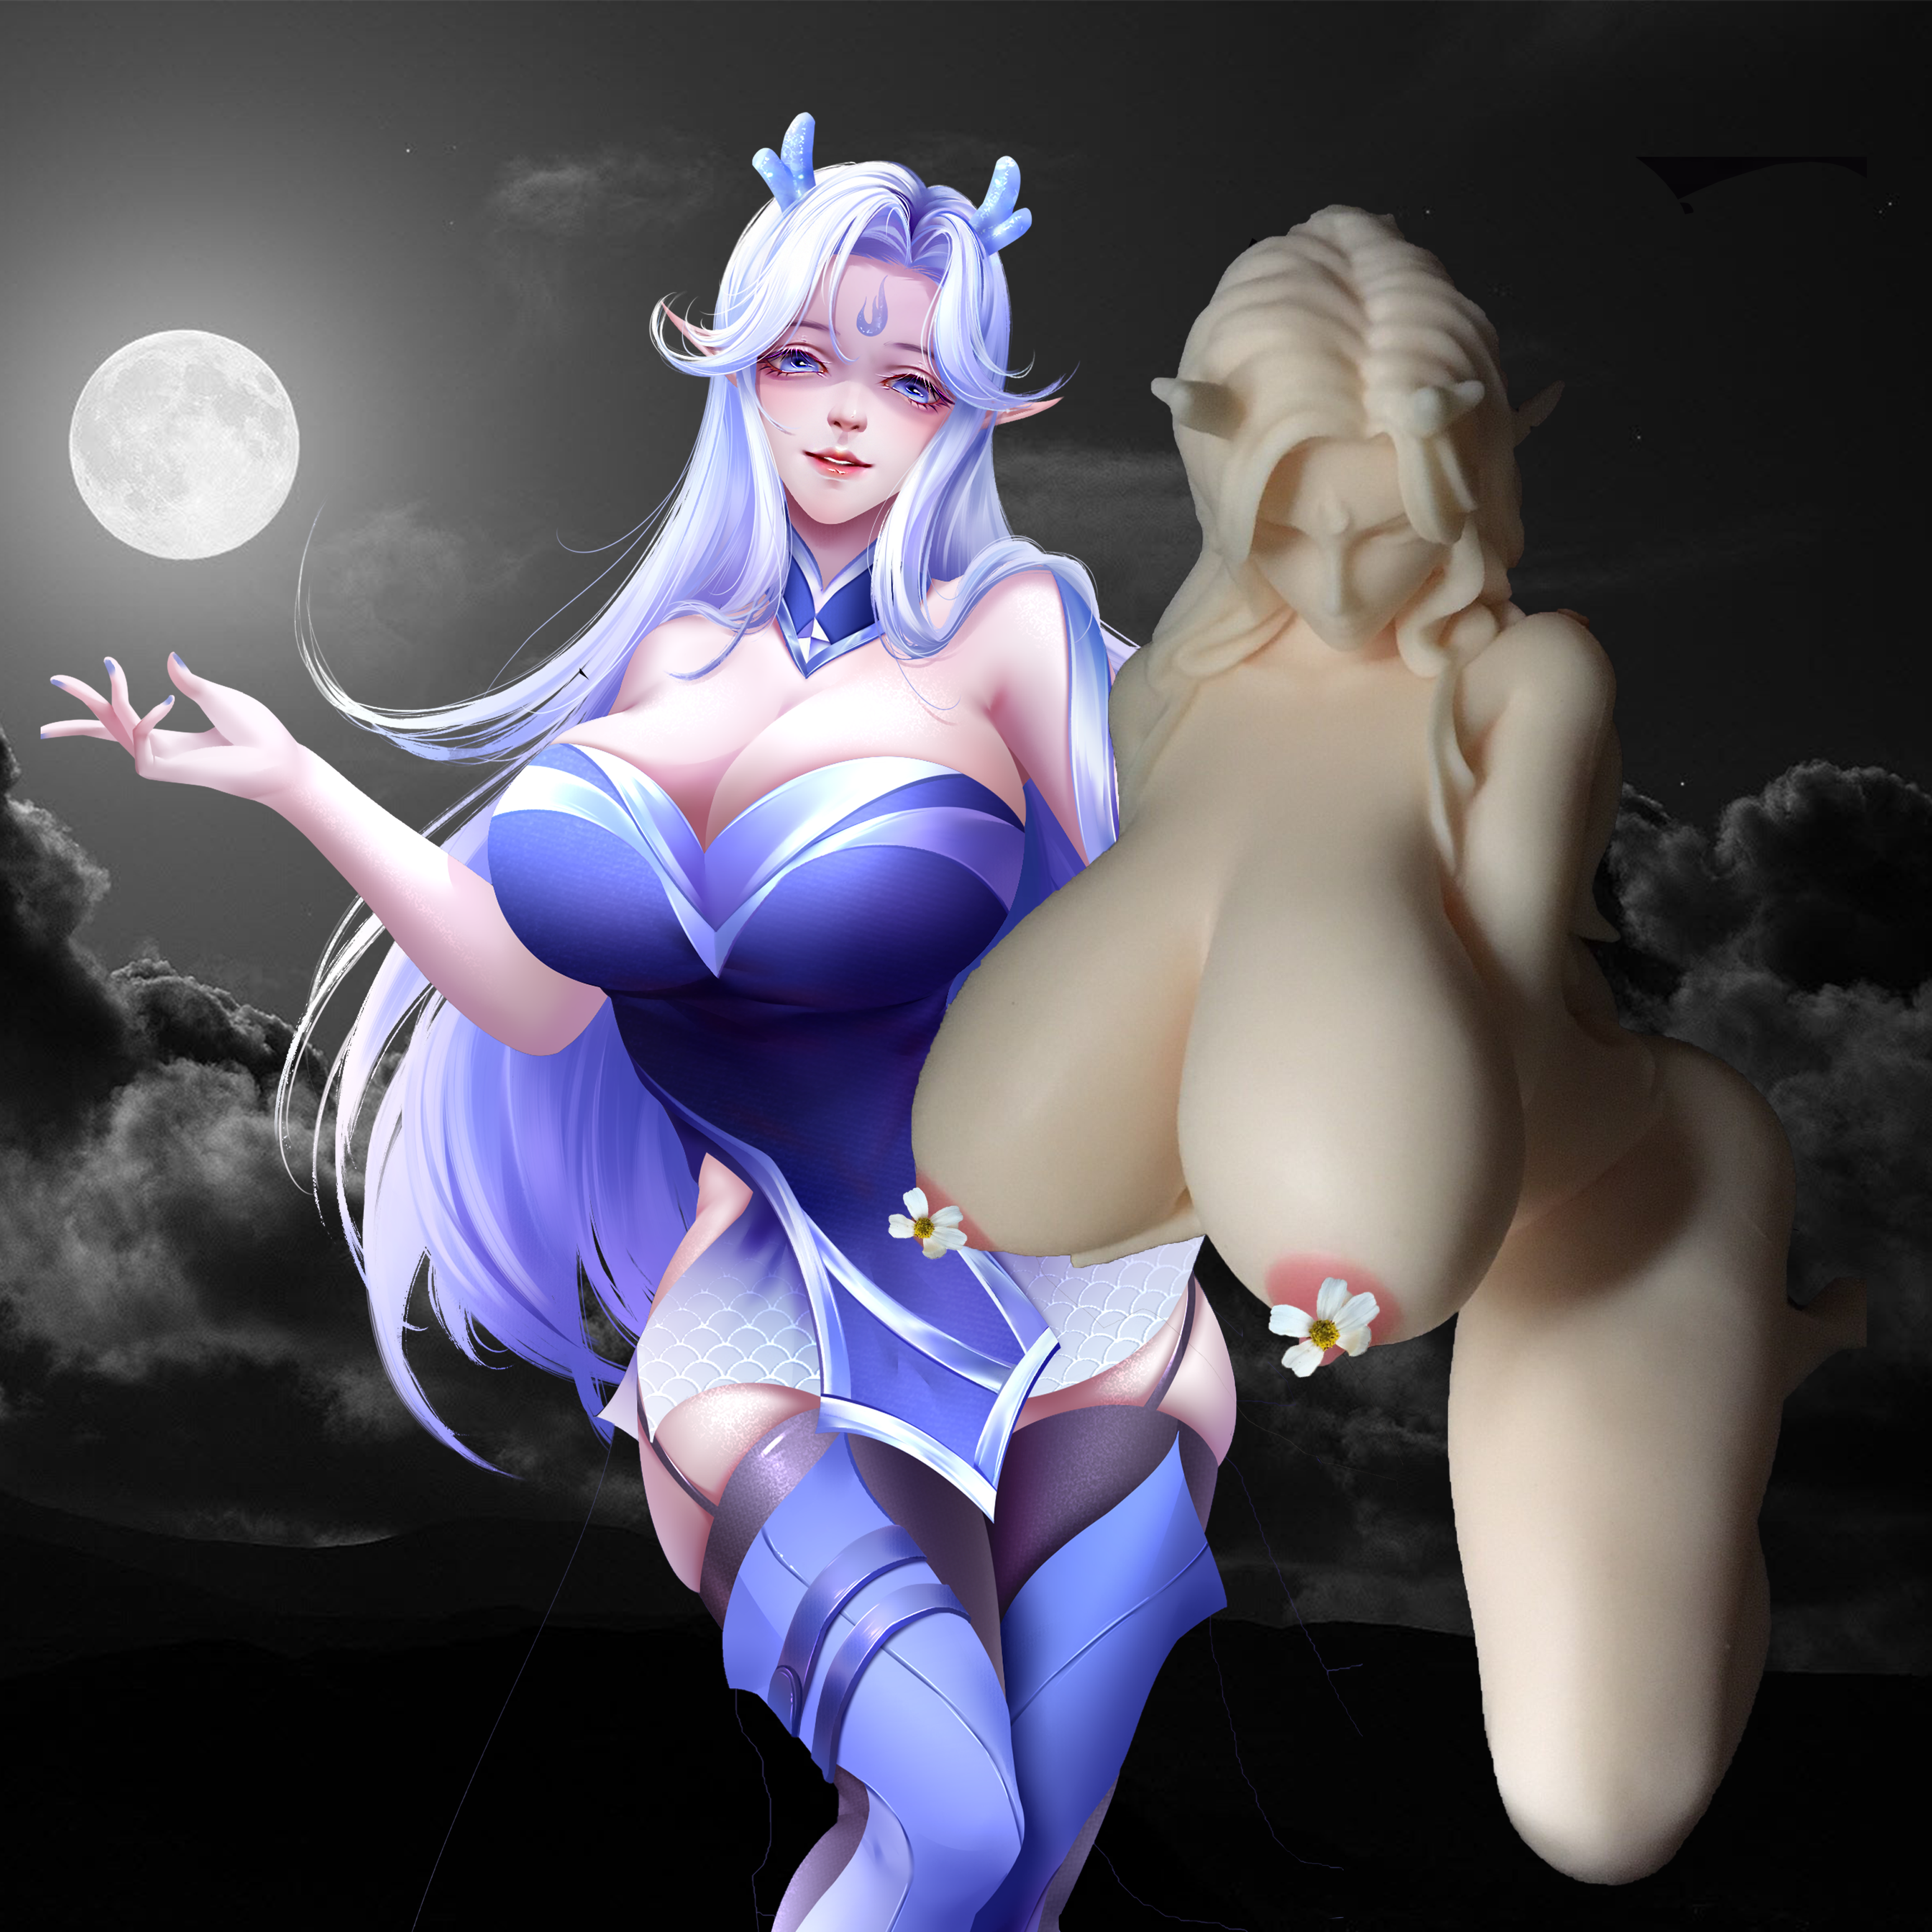 Hentai Onahole Doll, Anime Fleshlight Dragon Ling under the moon